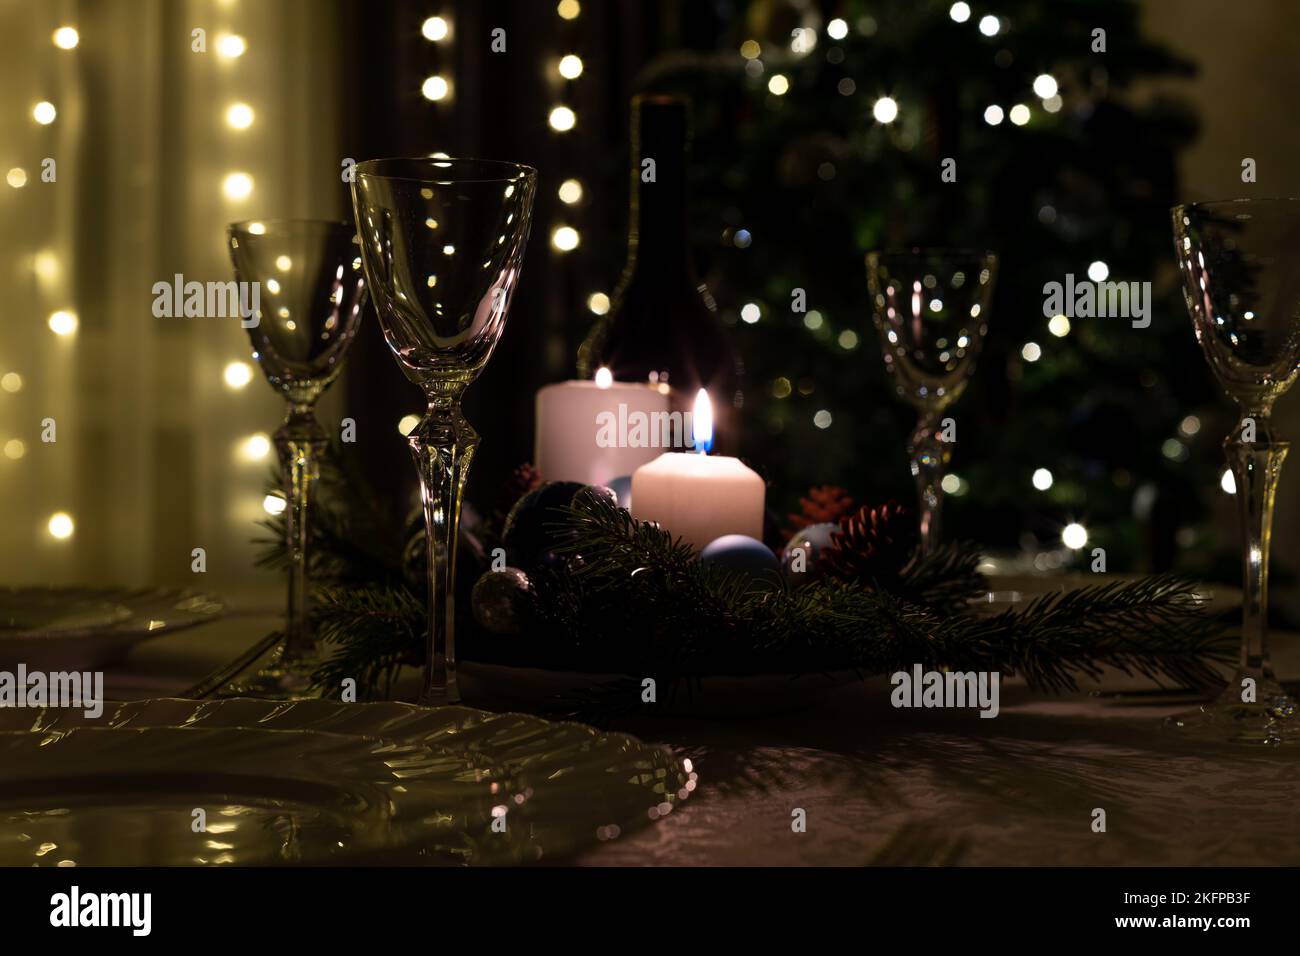 Serving the festive table. Food and drinks, plates and glasses. Evening lights and candles. Christmas dinner on Christmas Eve and New Year's Eve. Stock Photo